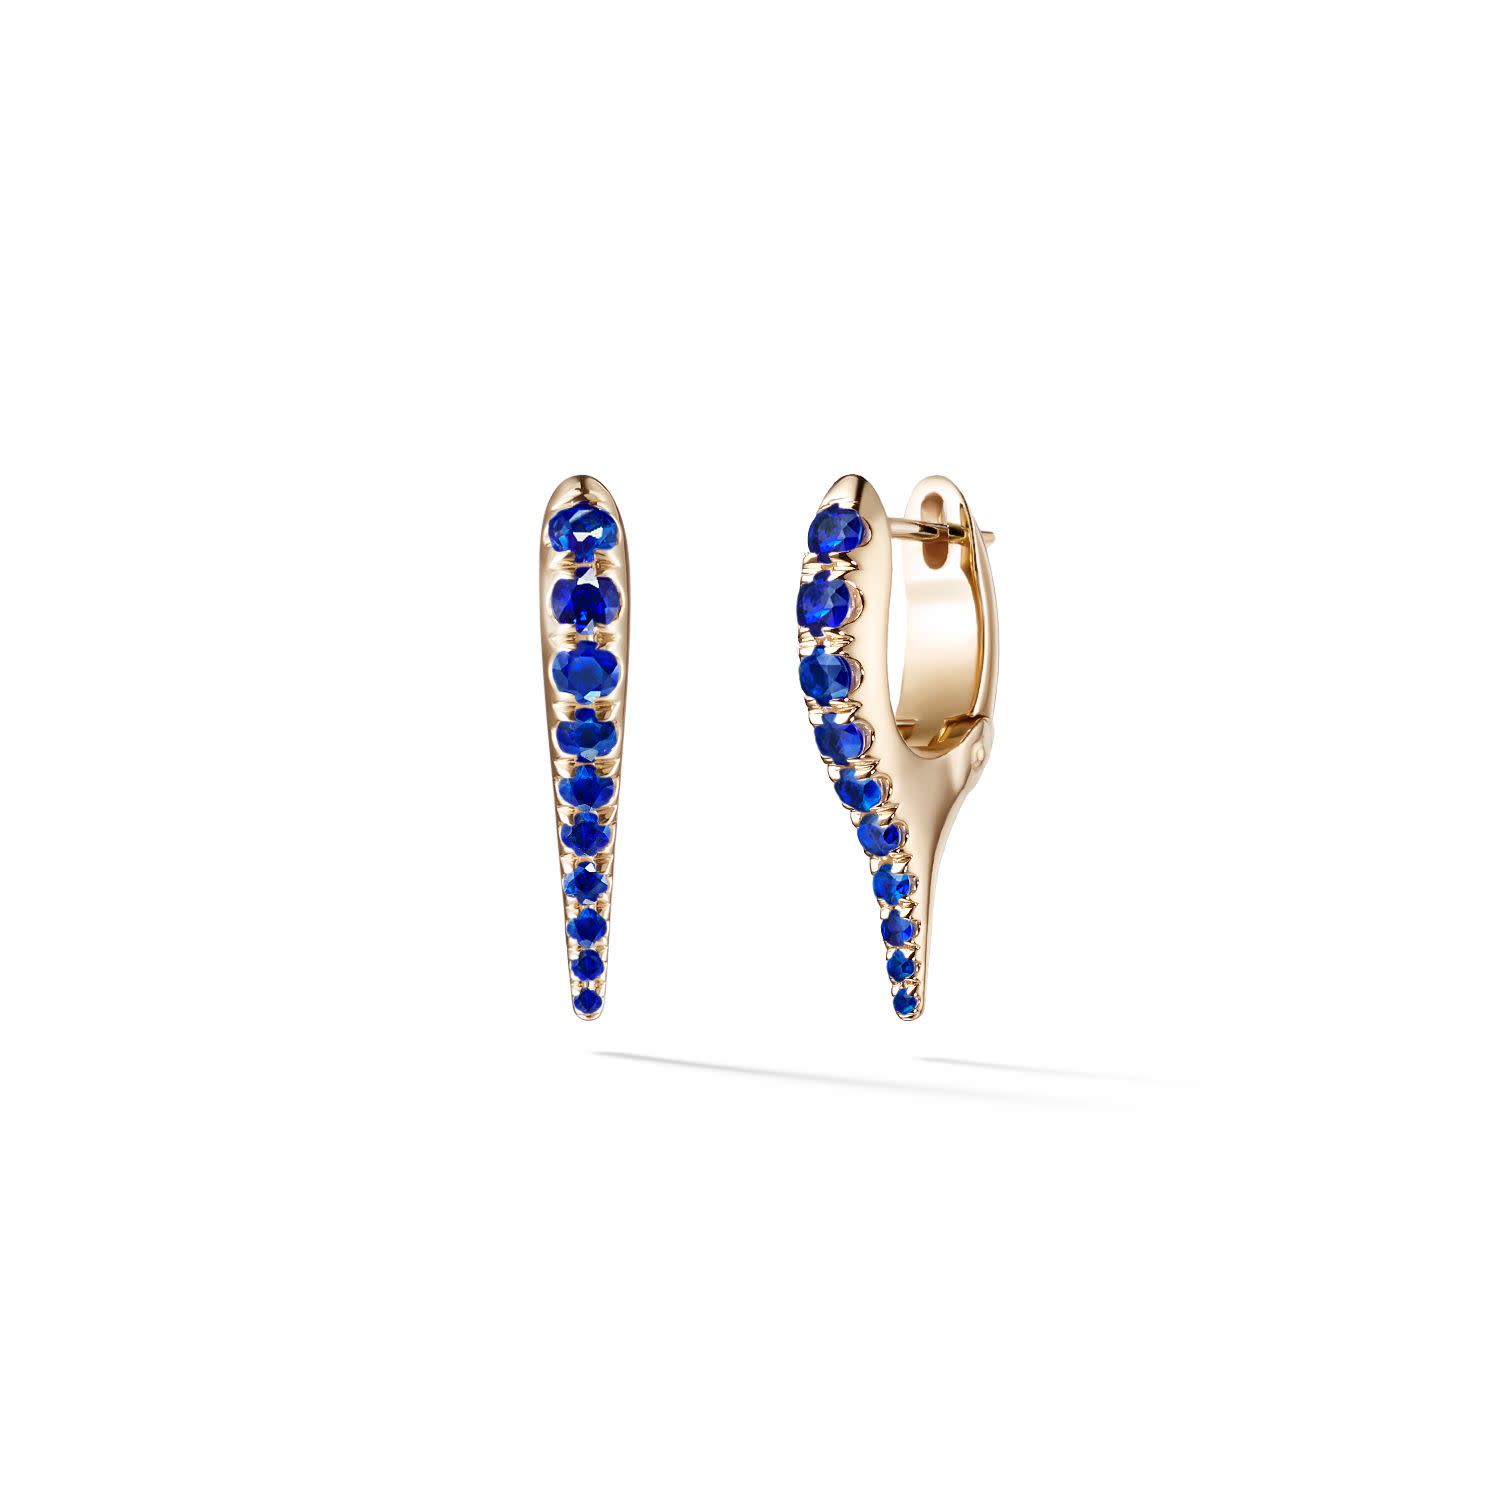 Mini Lola Needle Earrings with Blue Sapphires in 18K Yellow Gold